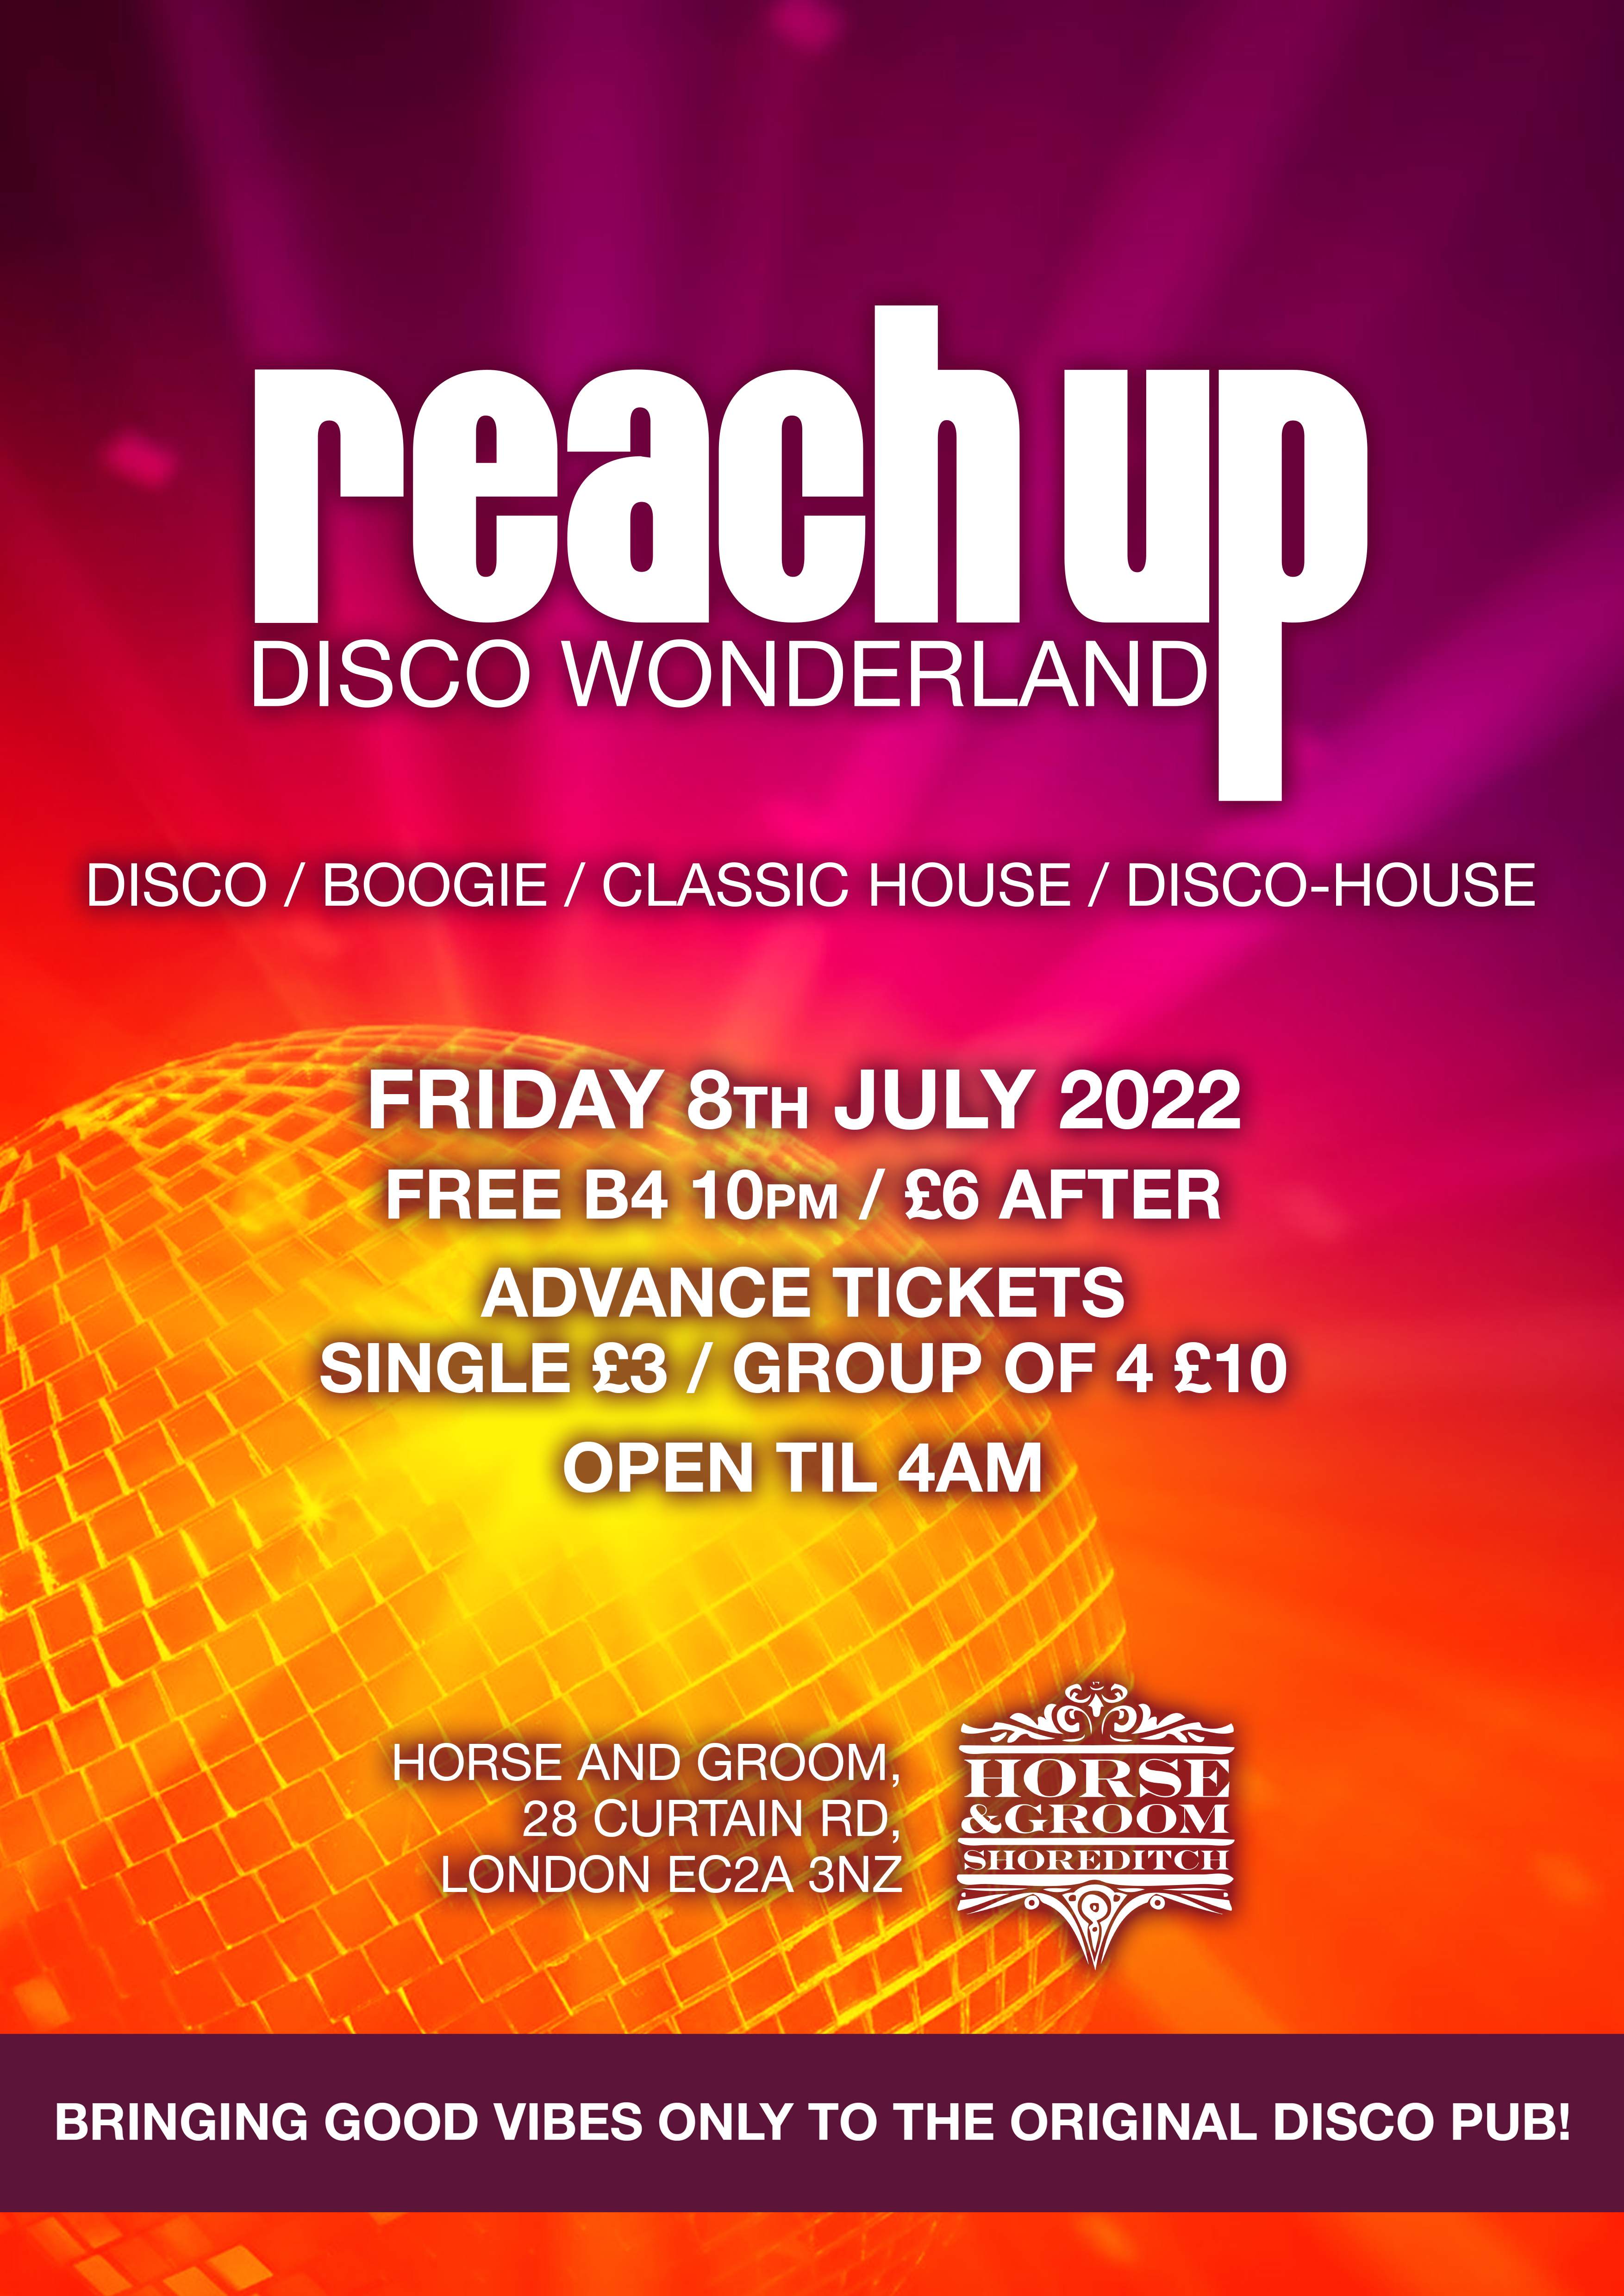 Reach Up Disco Wonderland with Andy Smith & Nick 'Reach Up' - フライヤー表